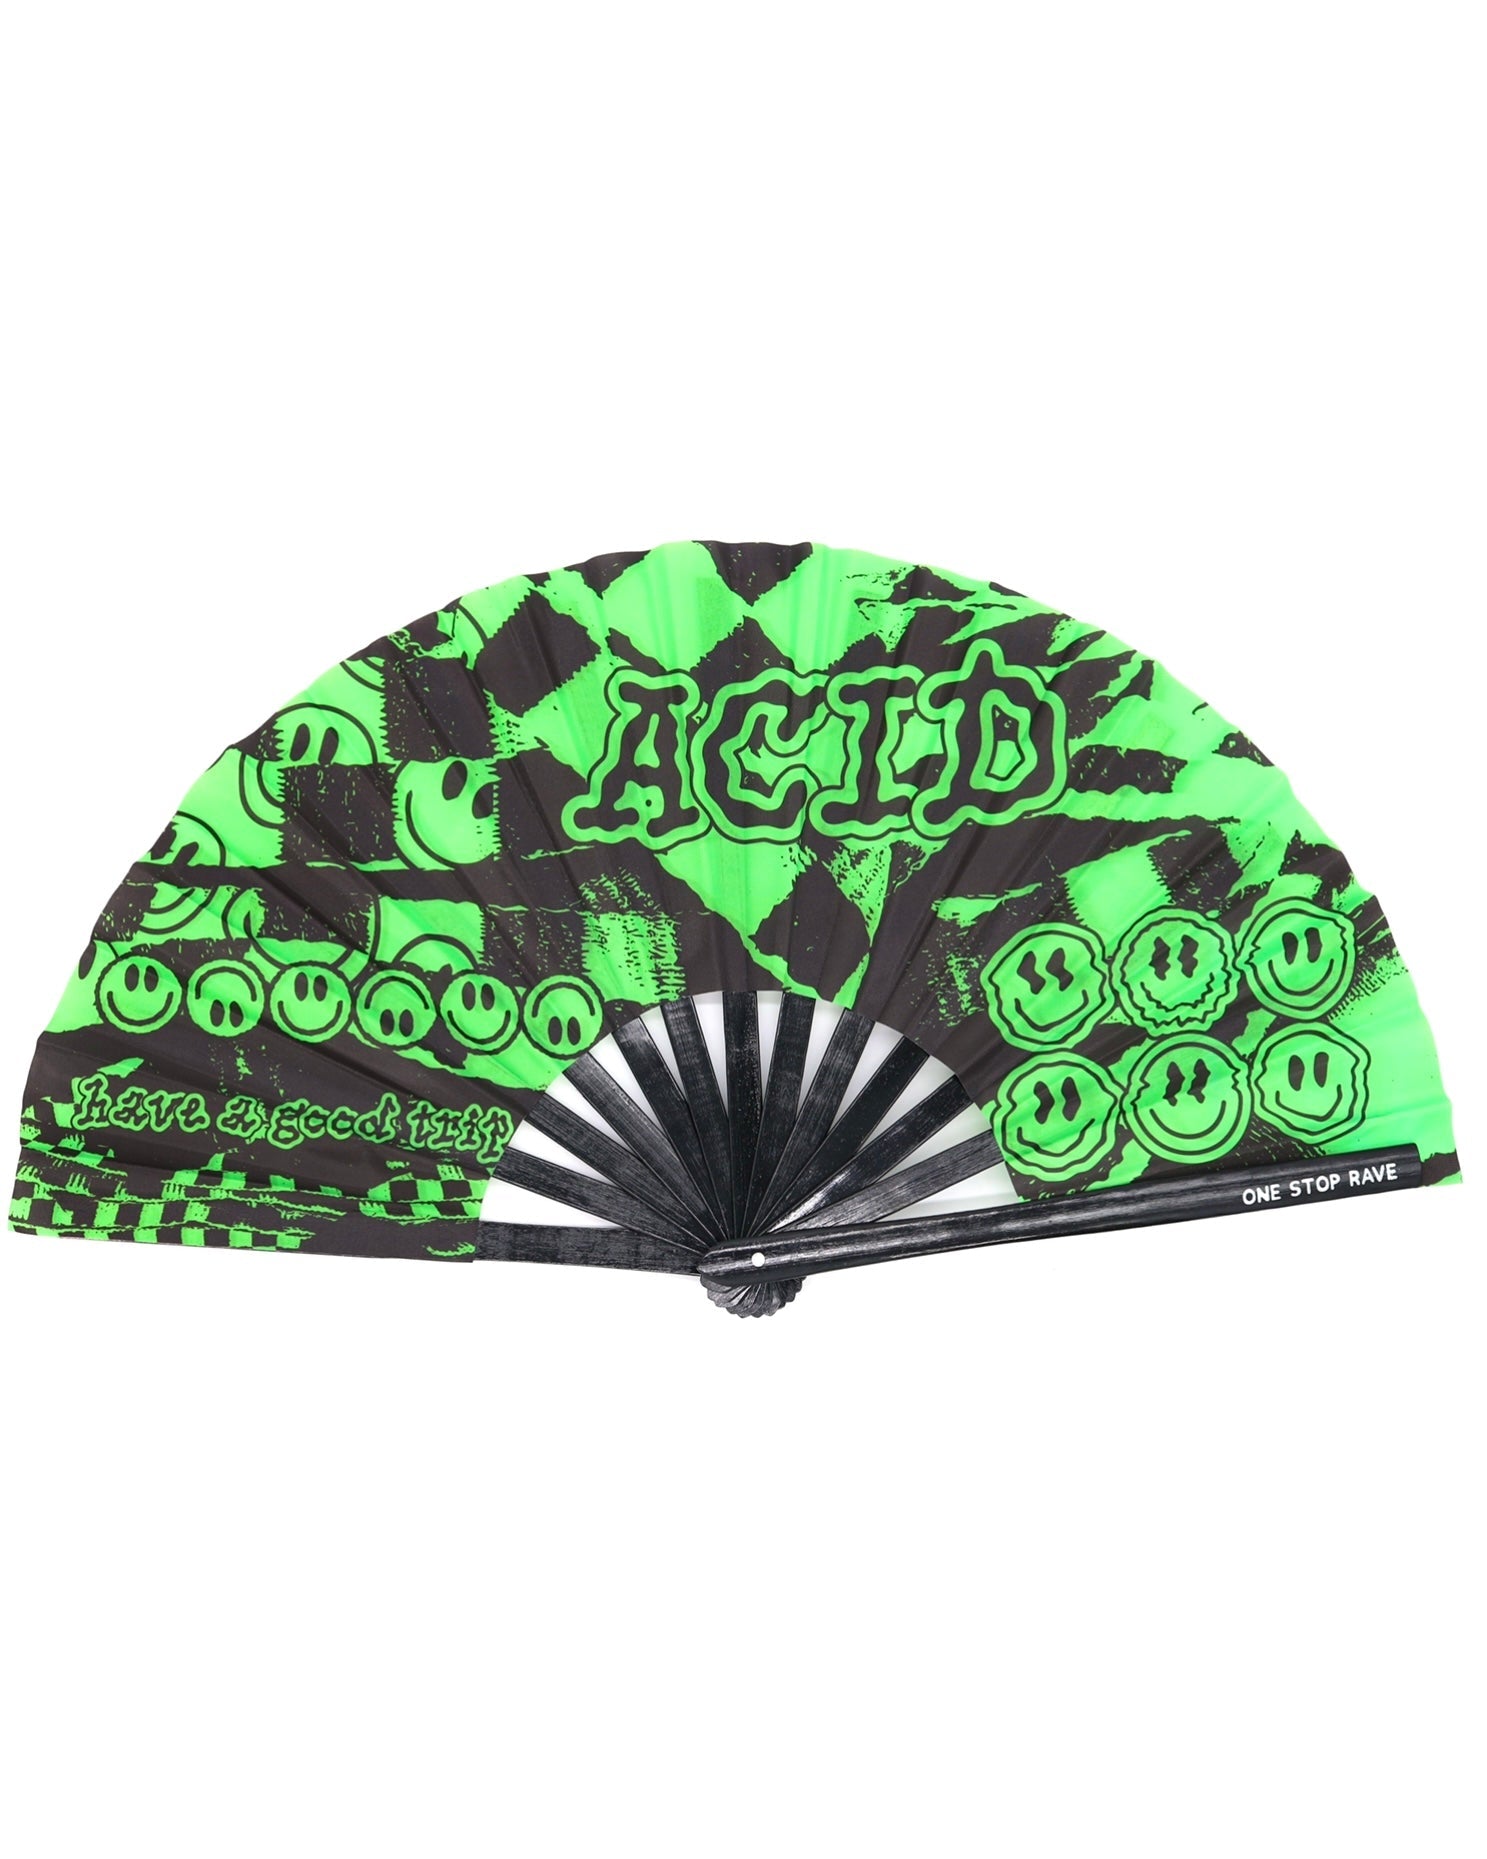 Bicycle Day Hand Fan, Festival Fans 13.5", - One Stop Rave